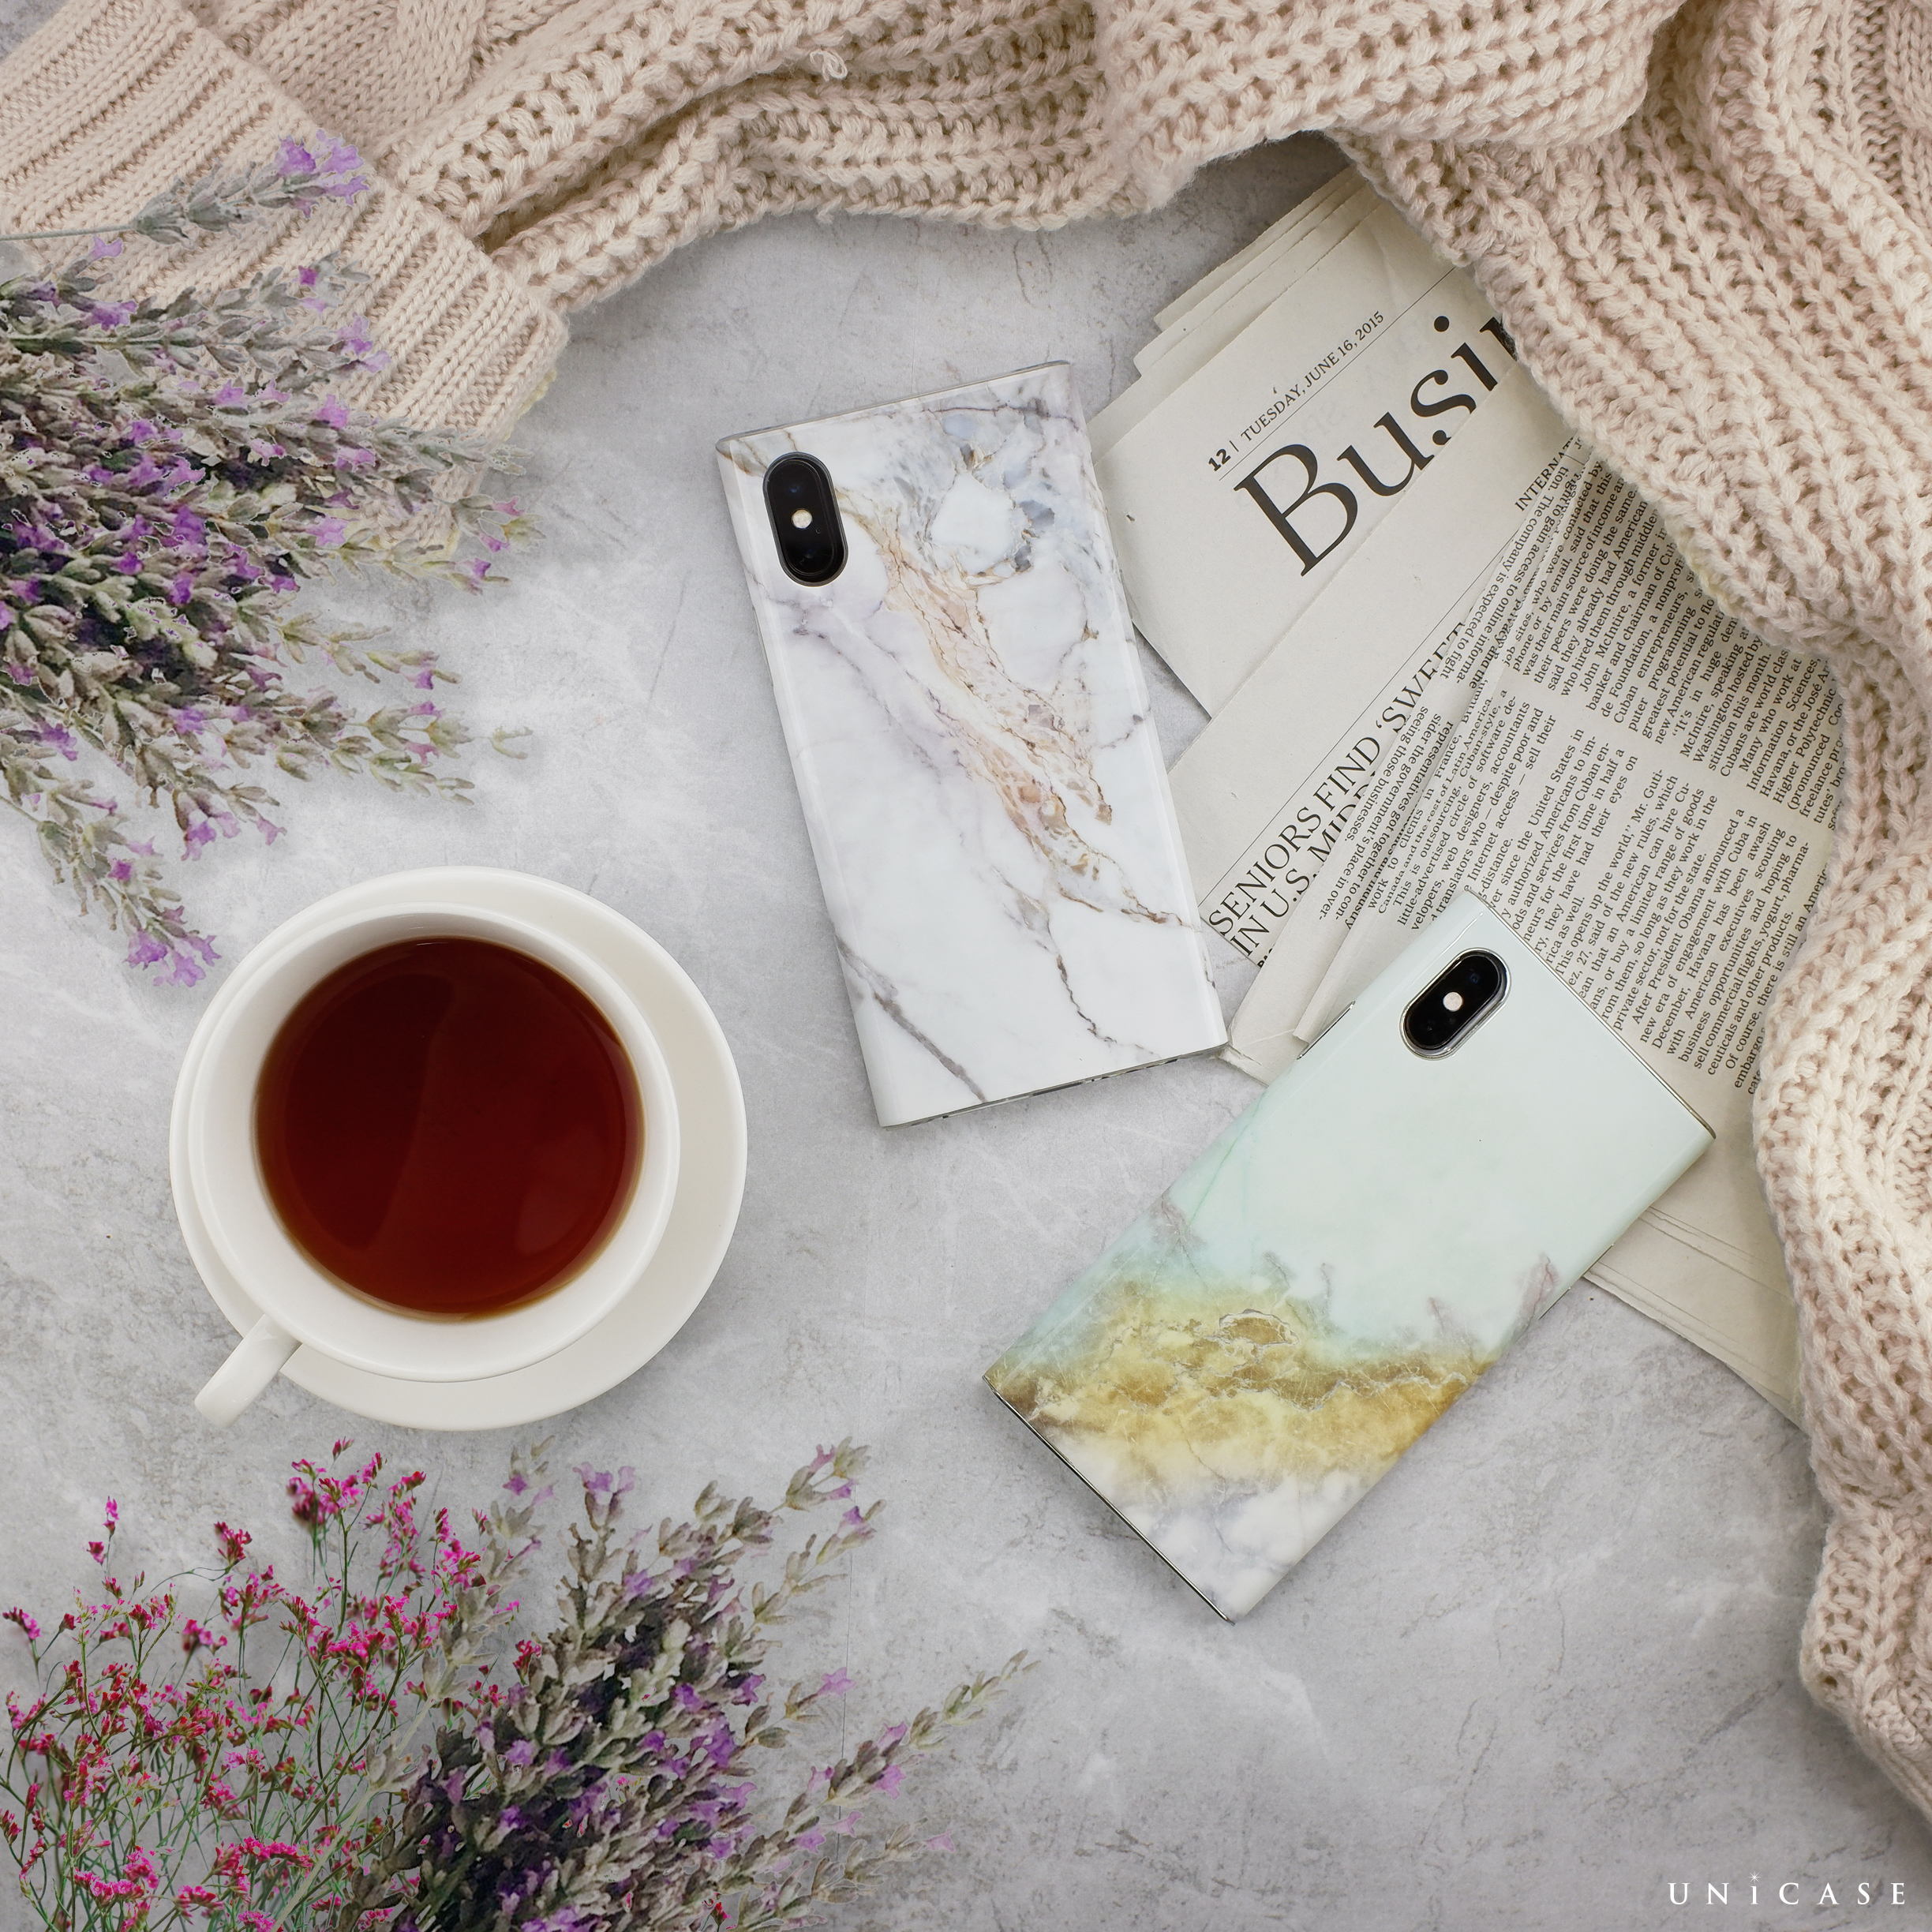 【iPhoneXS/X ケース】Maelys Collections Marble for iPhoneXS/X (Mint)サブ画像